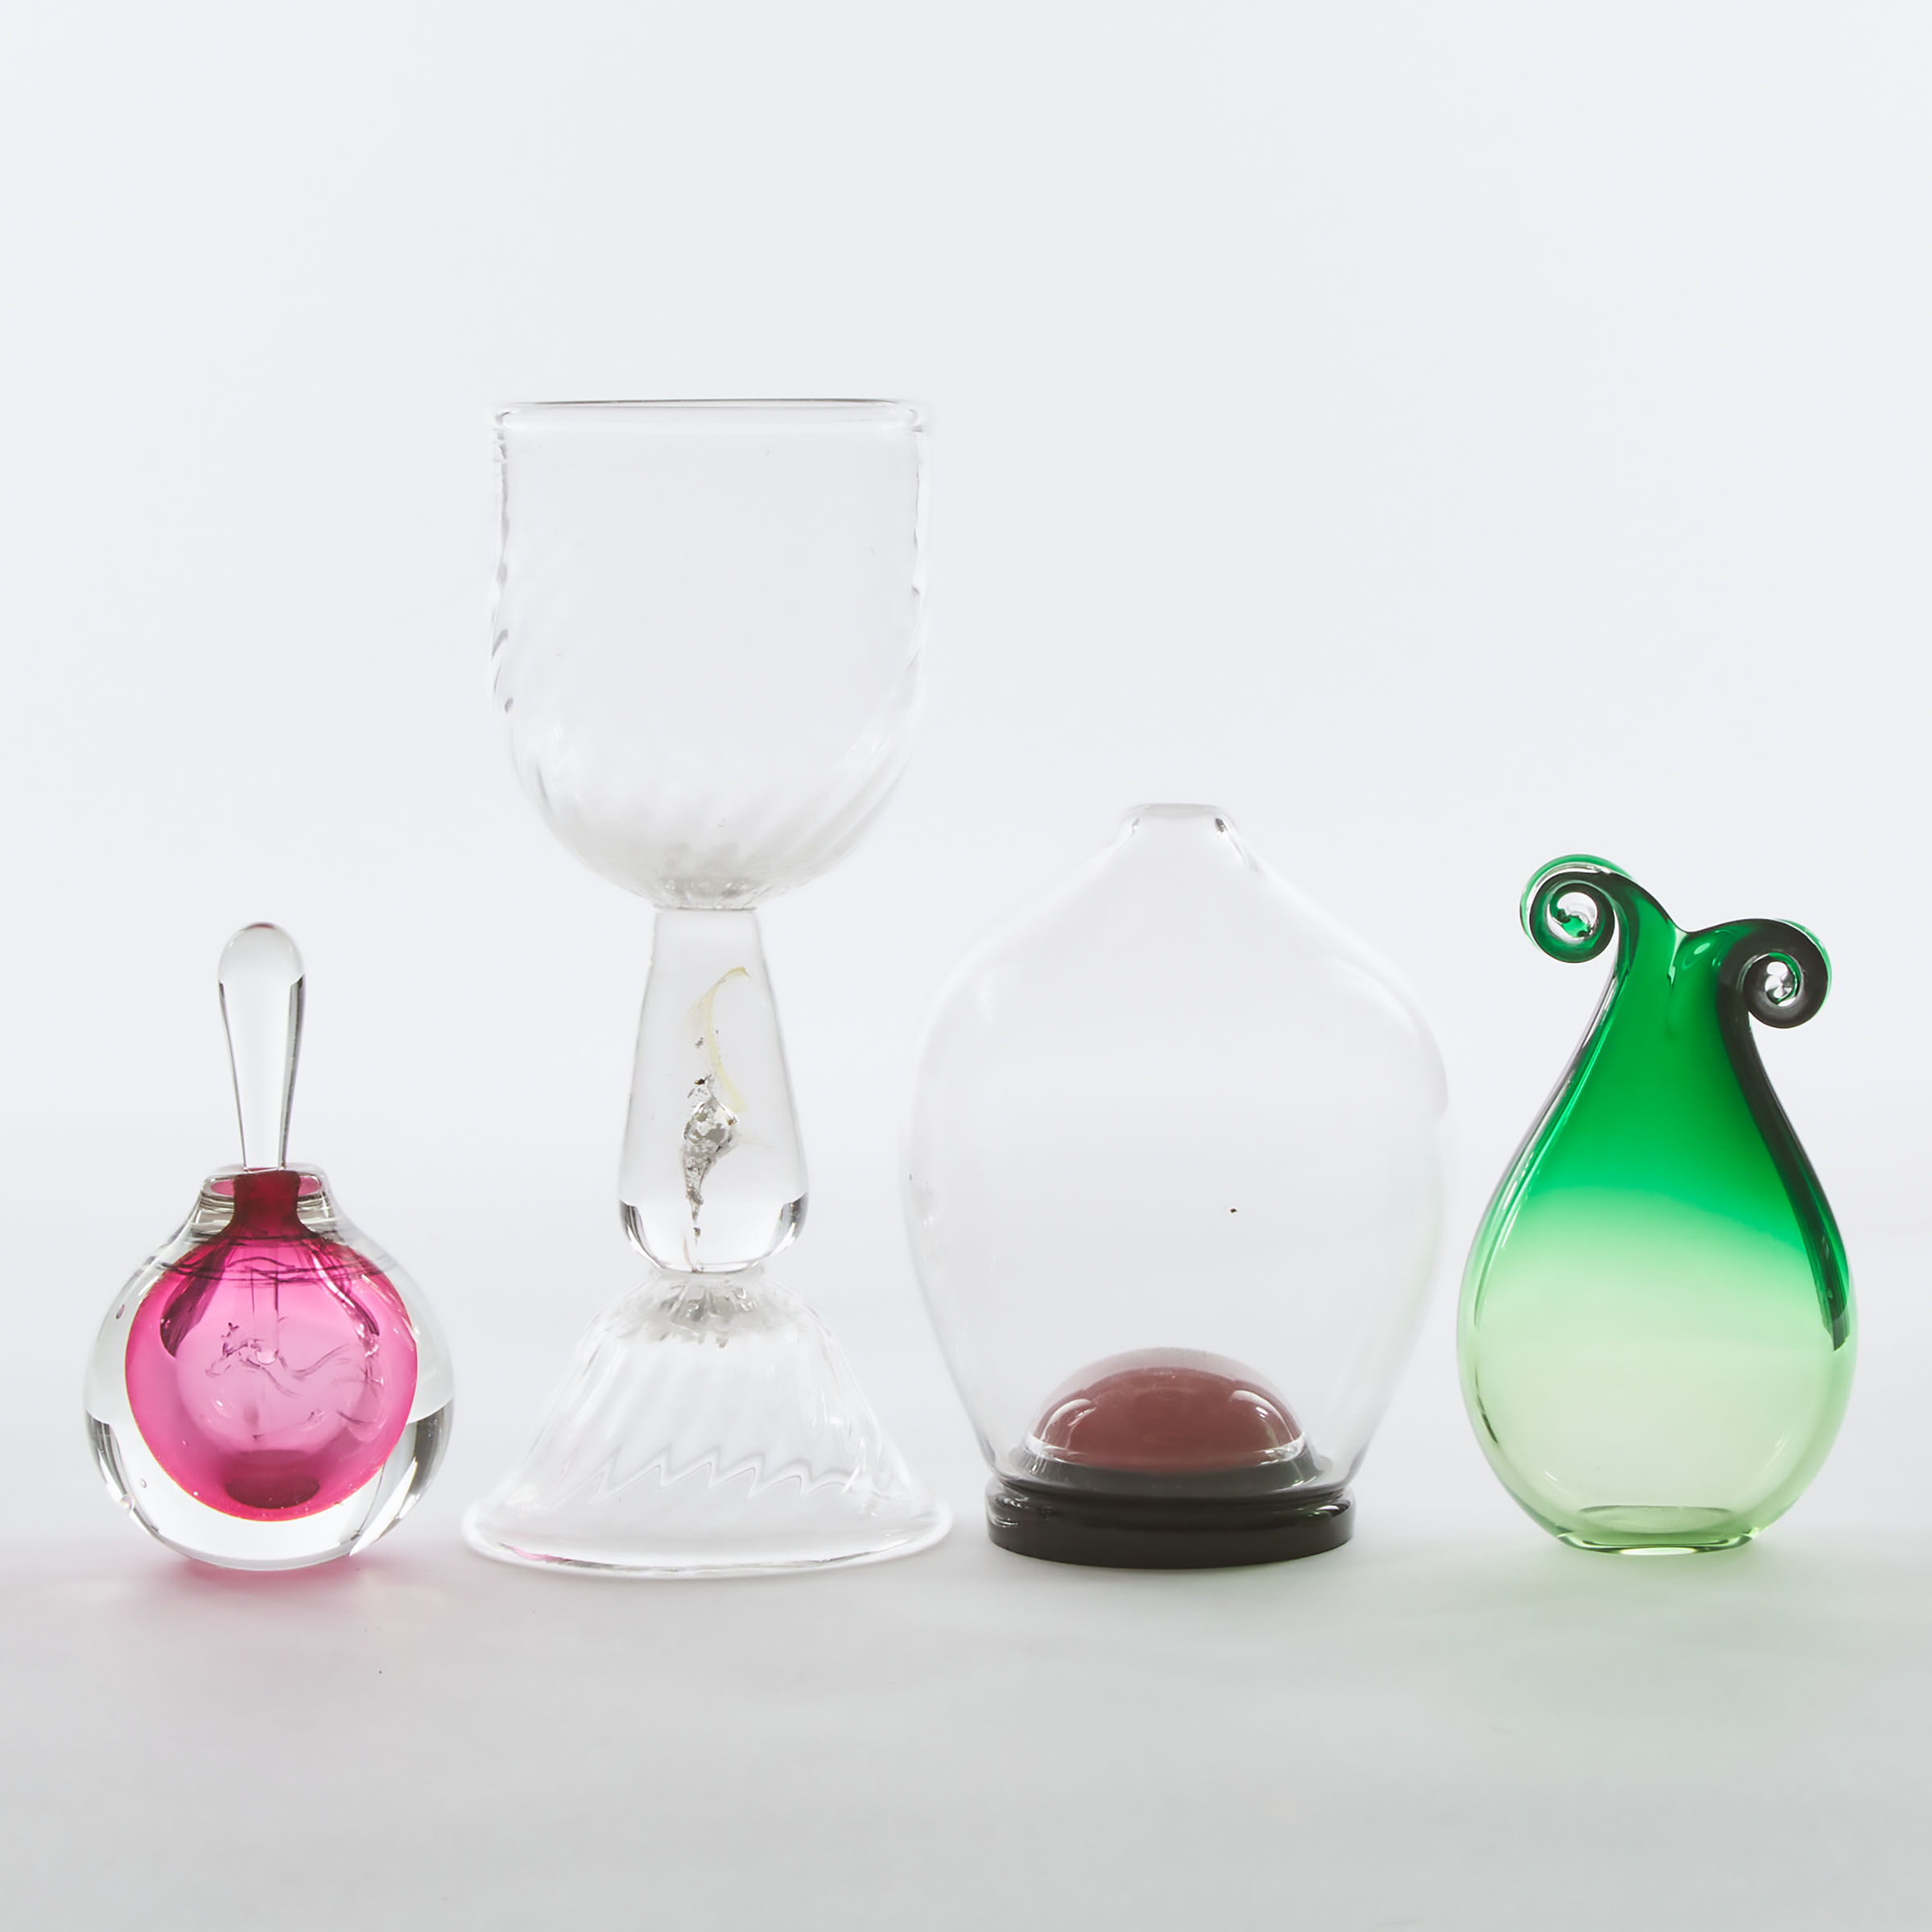 Two Canadian Studio Glass Vases, Goblet, and Perfume Bottle